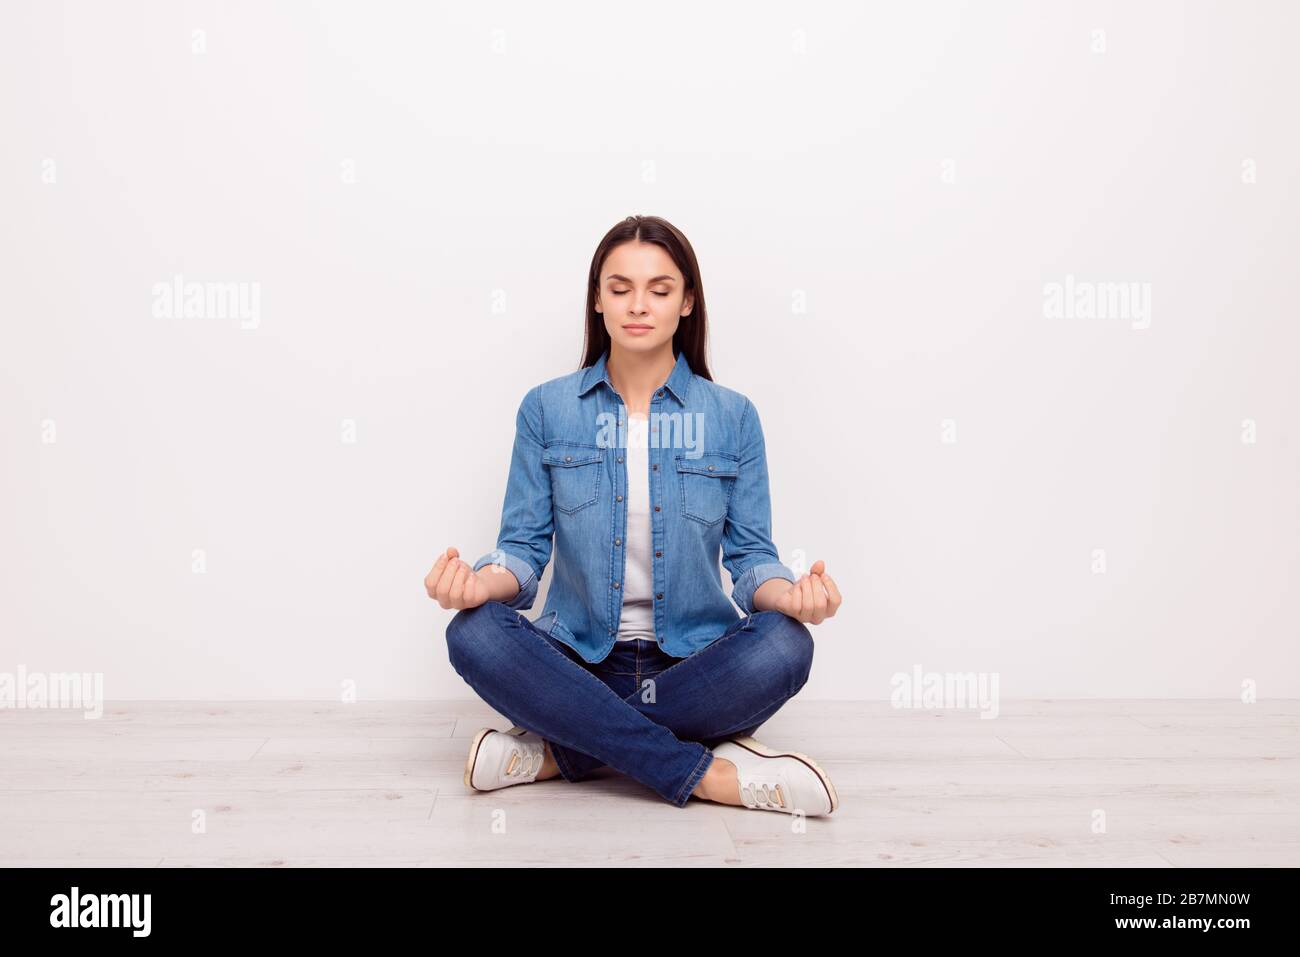 Photo of concentrated woman gesturing om sign sitting on floor and meditating Stock Photo